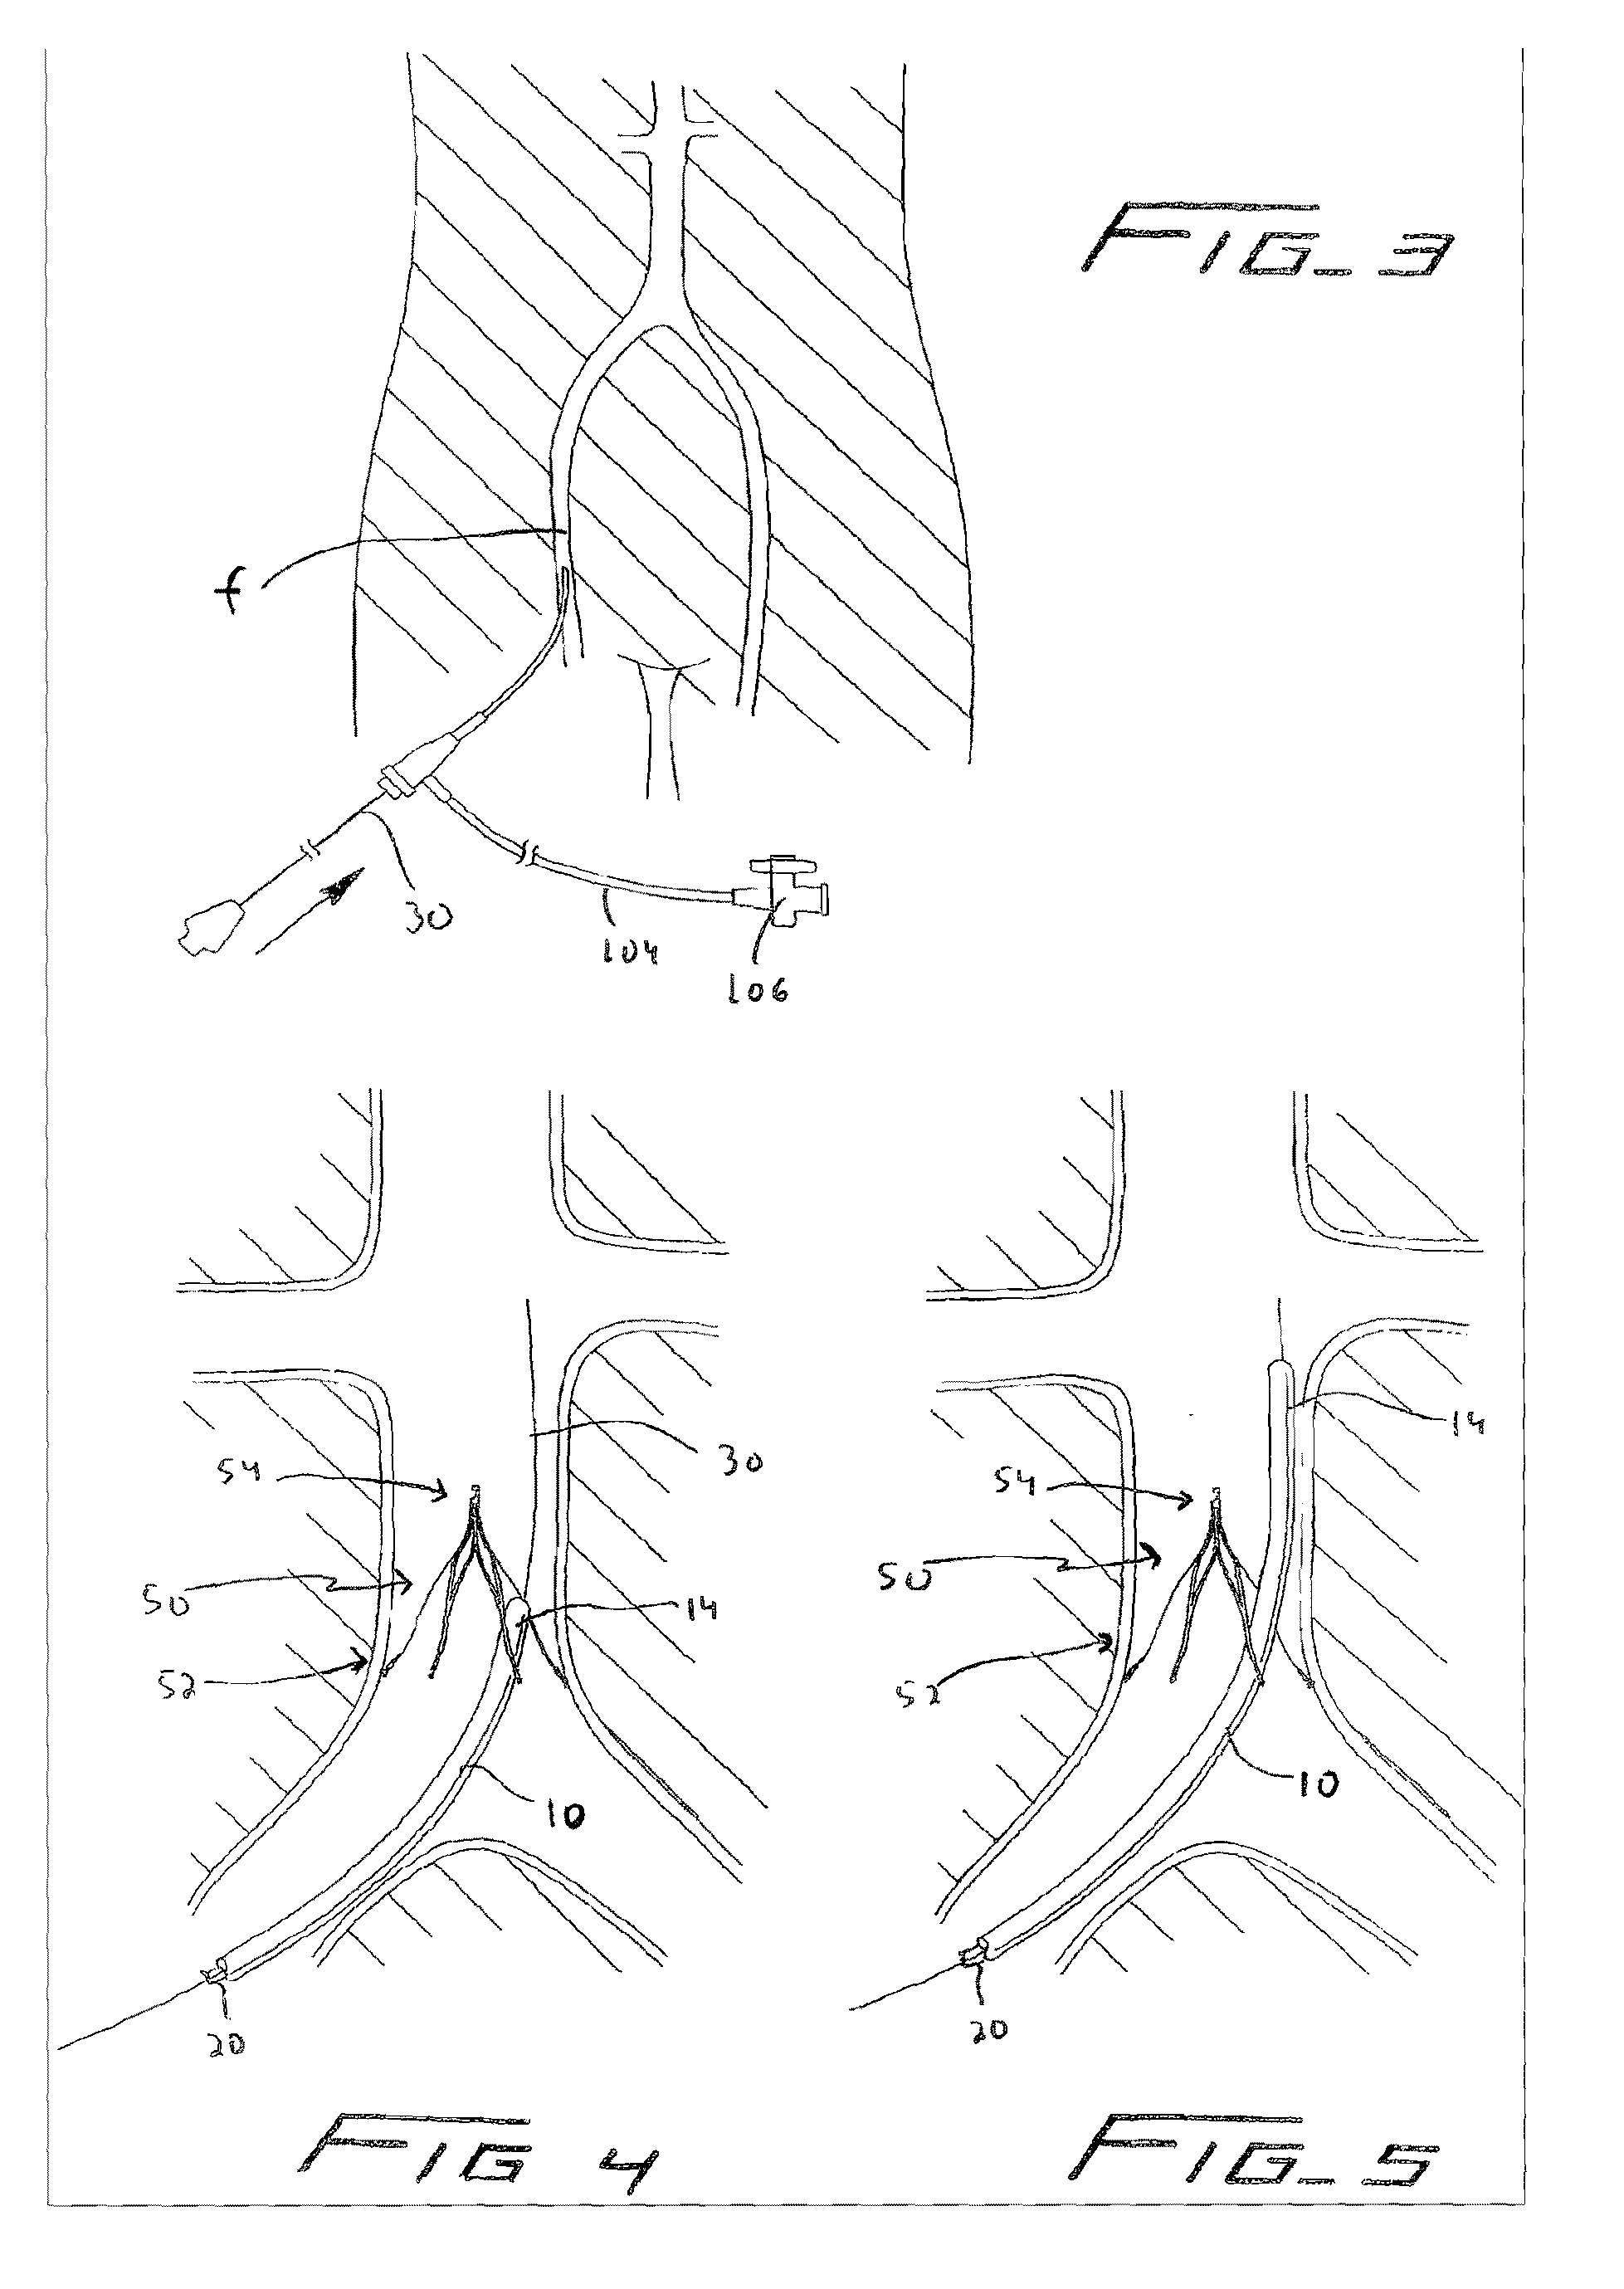 Method of removing a vein filter